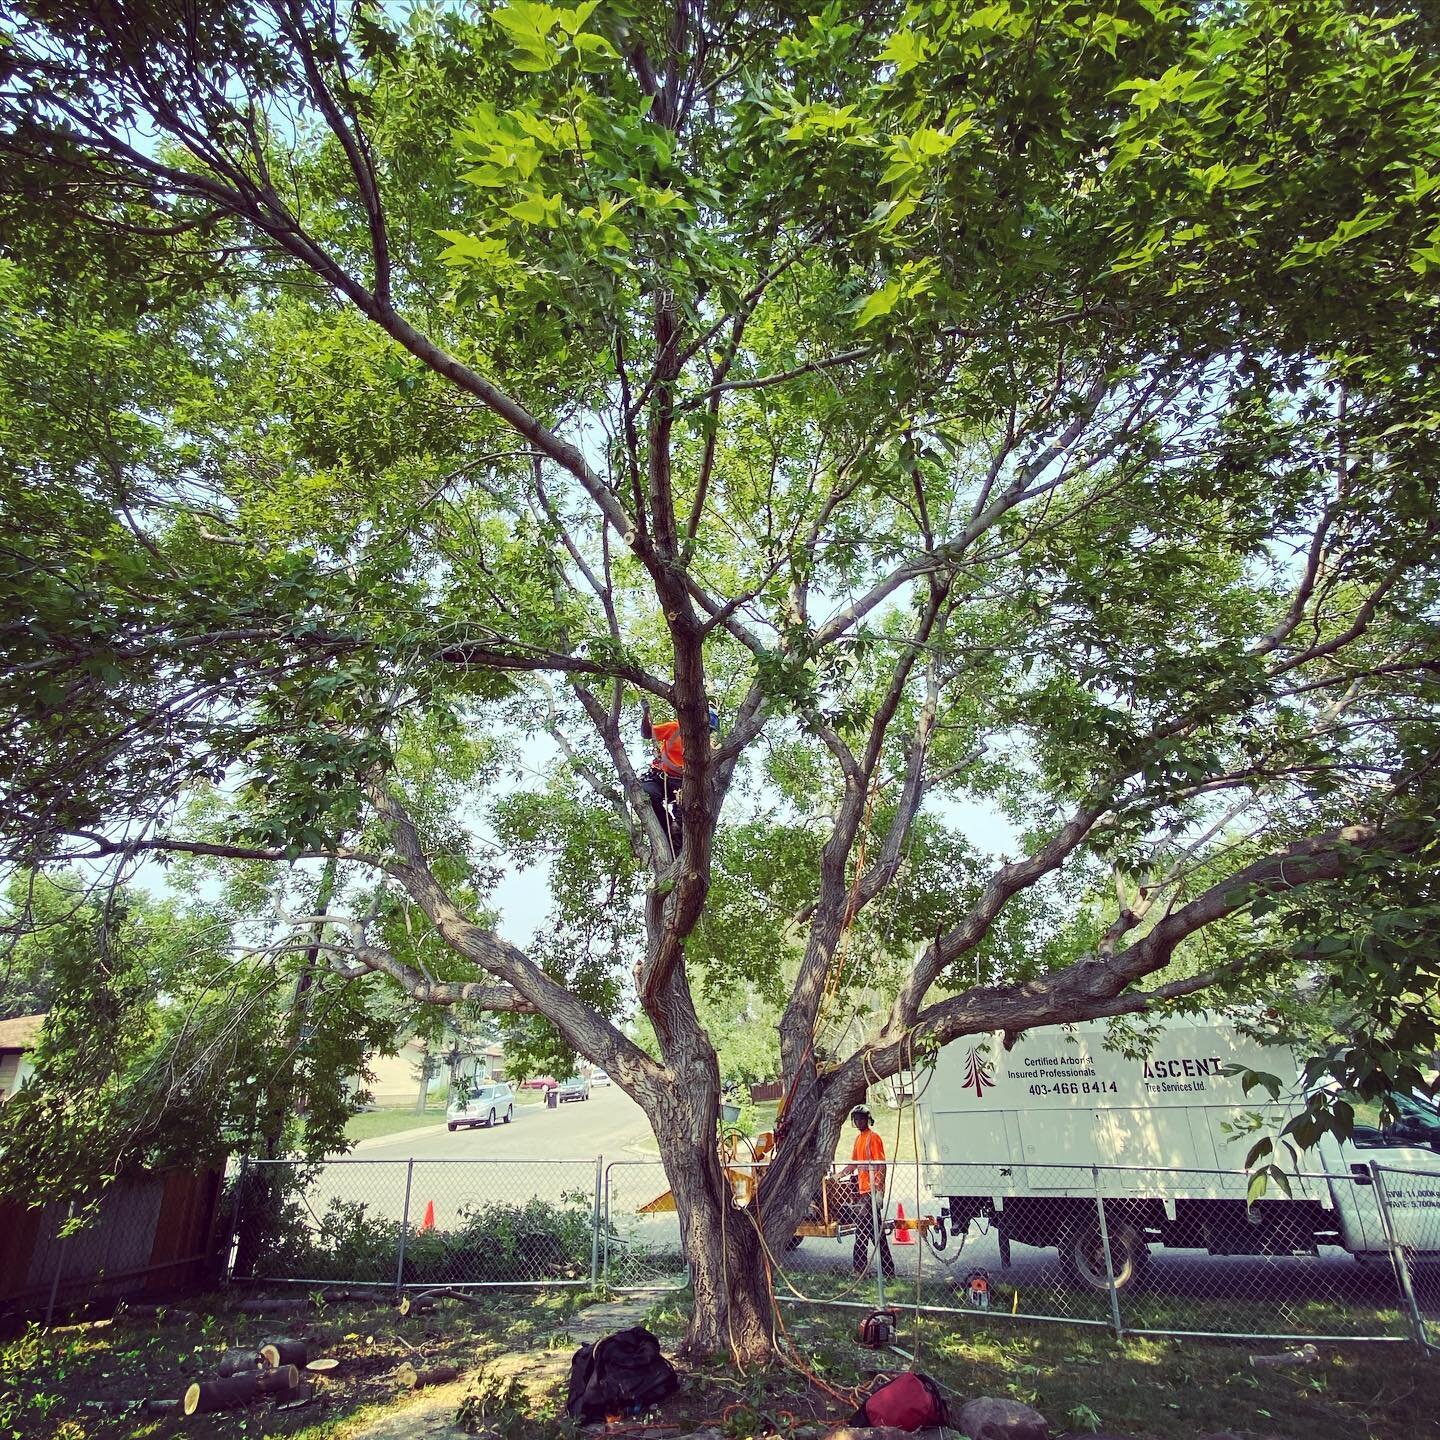 We had the privilege of pruning this amazing Manitoba maple earlier this week. 
#arborist
#calgary 
#treework
#isacertified 
#treetrimming 
#pruning 
#treeservice
#freequotes
#treeclimber 
#treeclimbing
#maple